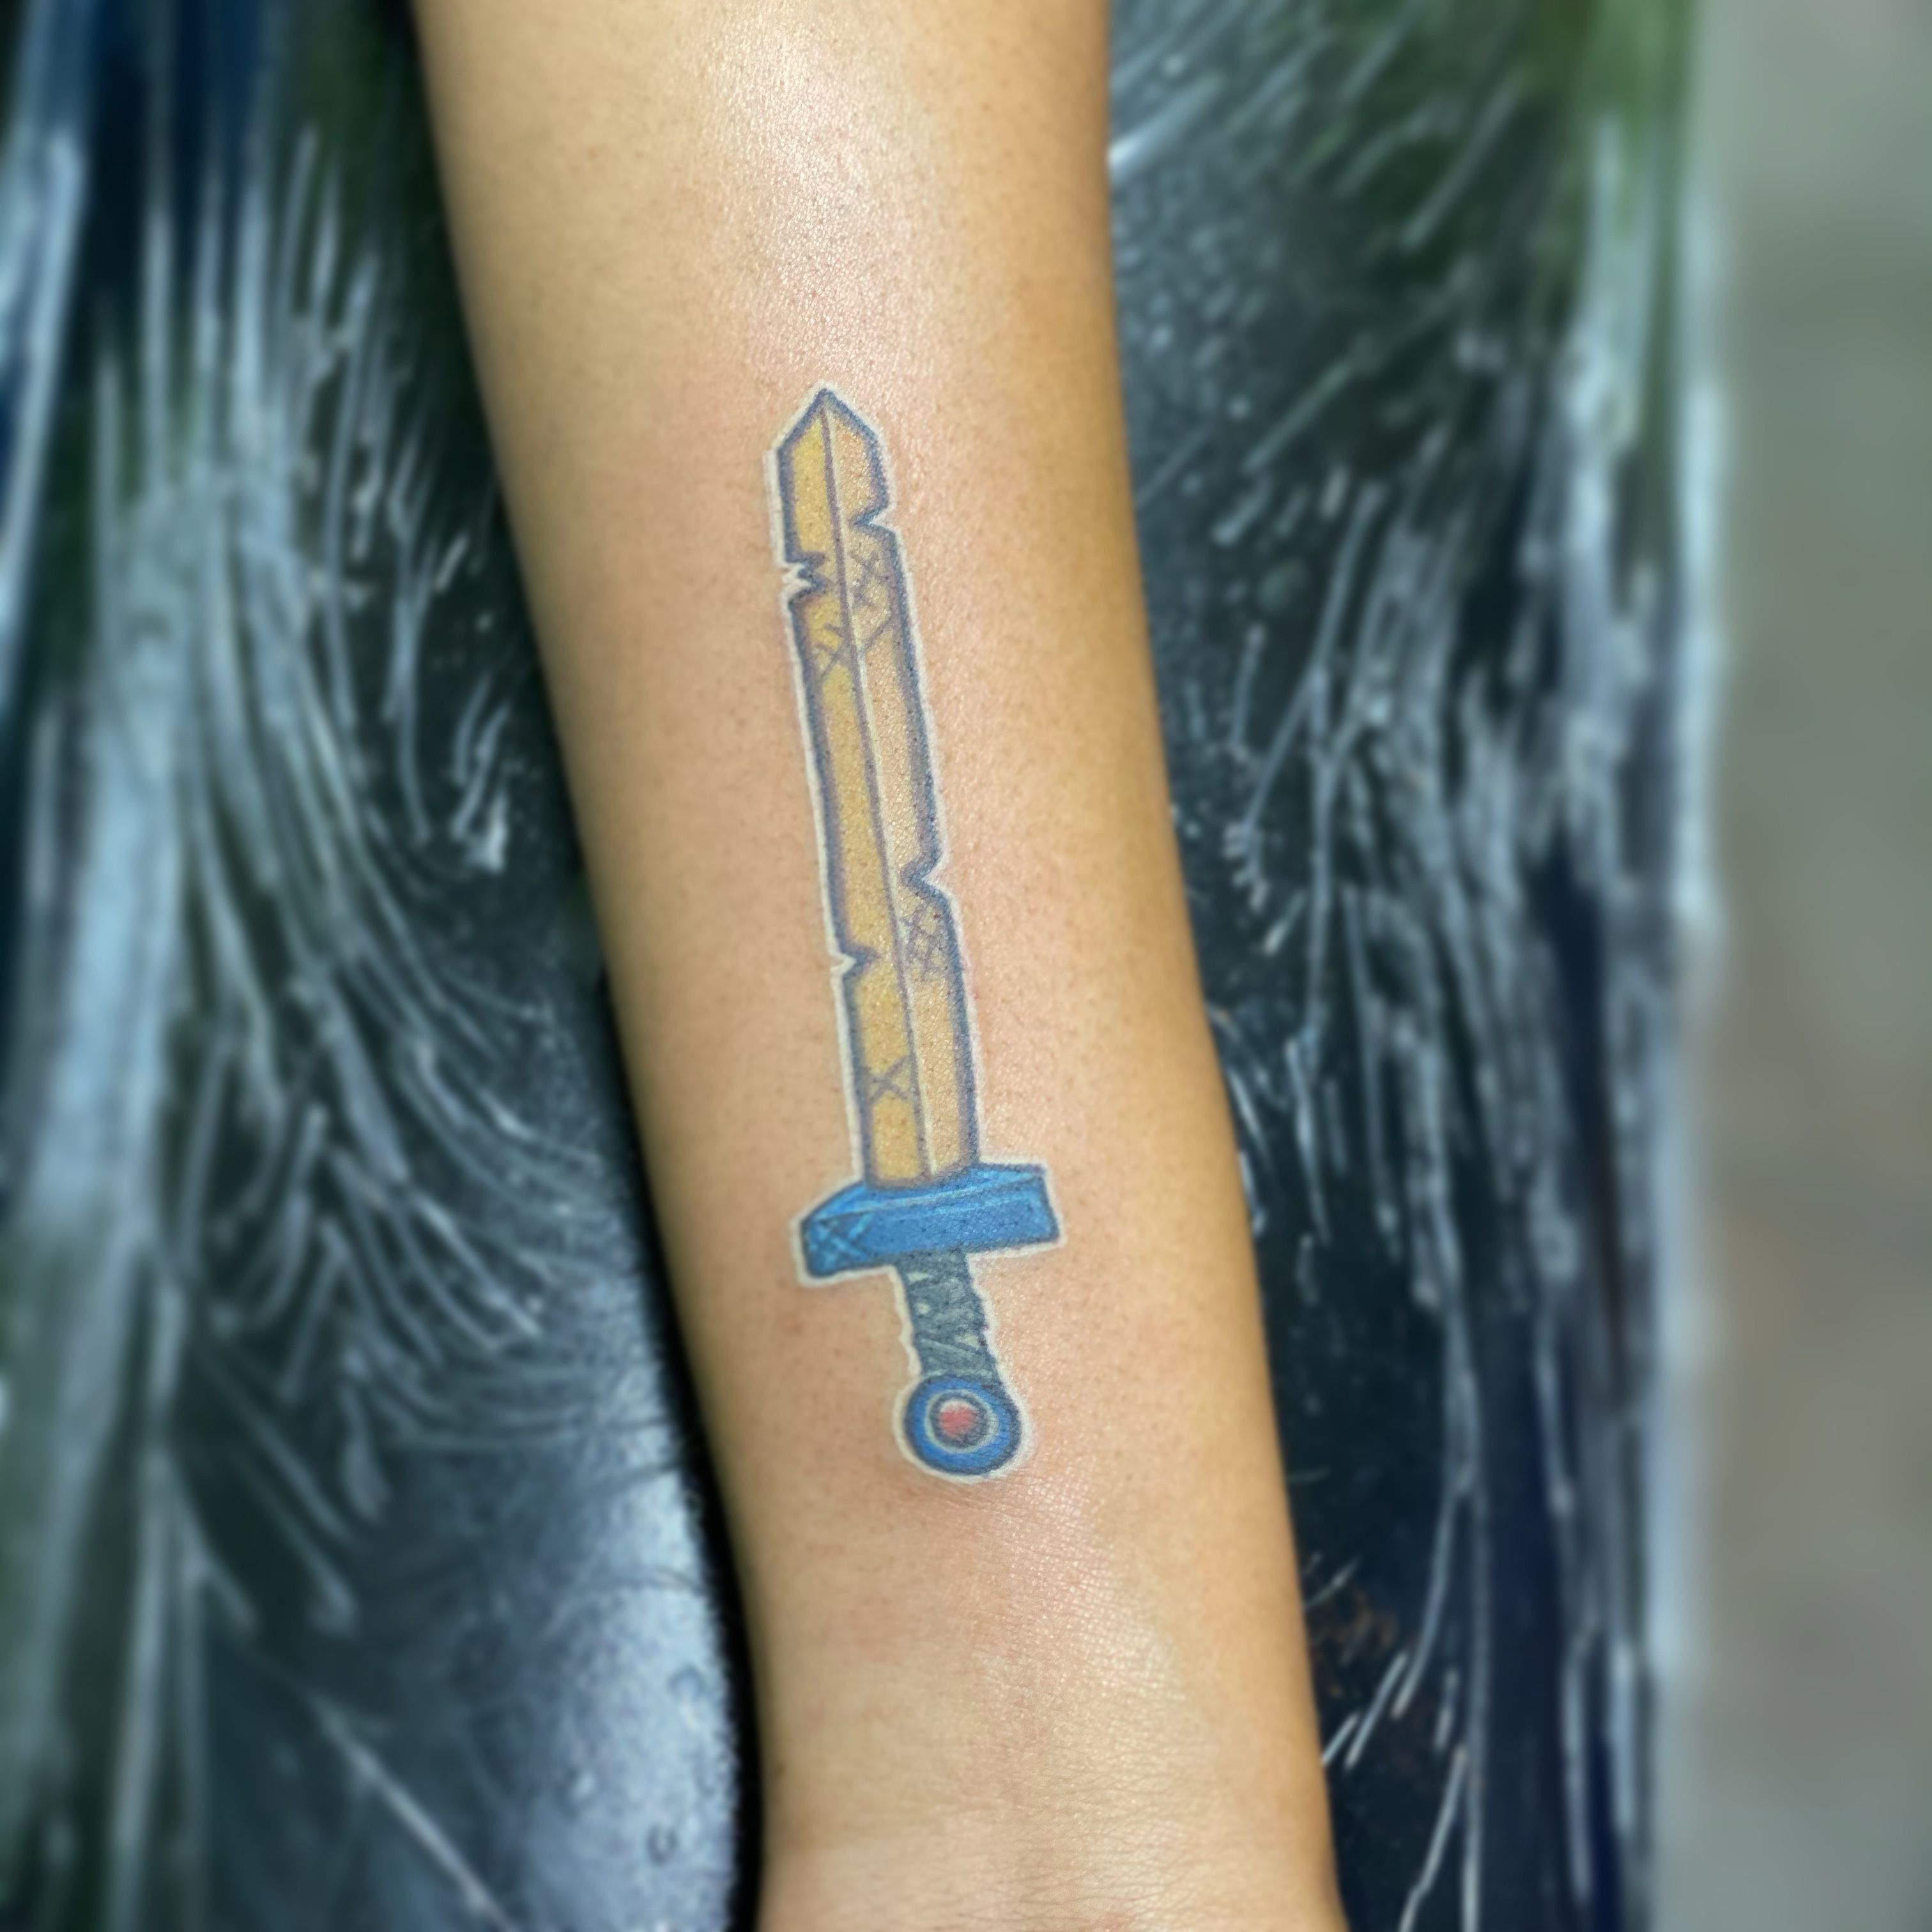 Snapon Tools  Our tools are built to last a lifetime just like the  Snapon ink on these diehard fans Share your own branded tattoo in the  comments this NationalTattooDay  Facebook